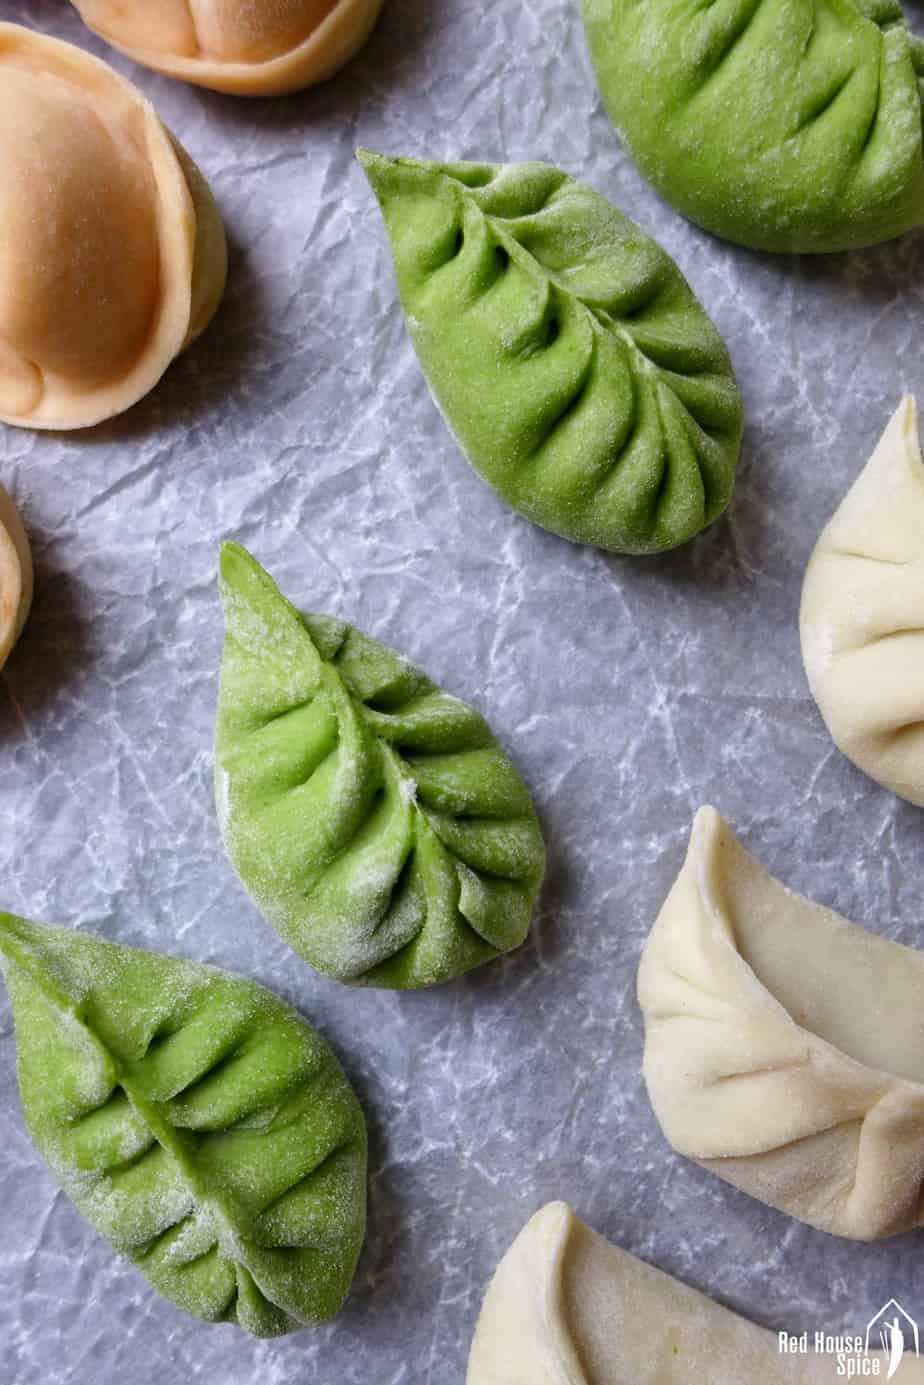 Chinese dumplings made in green colour and leaf pattern.